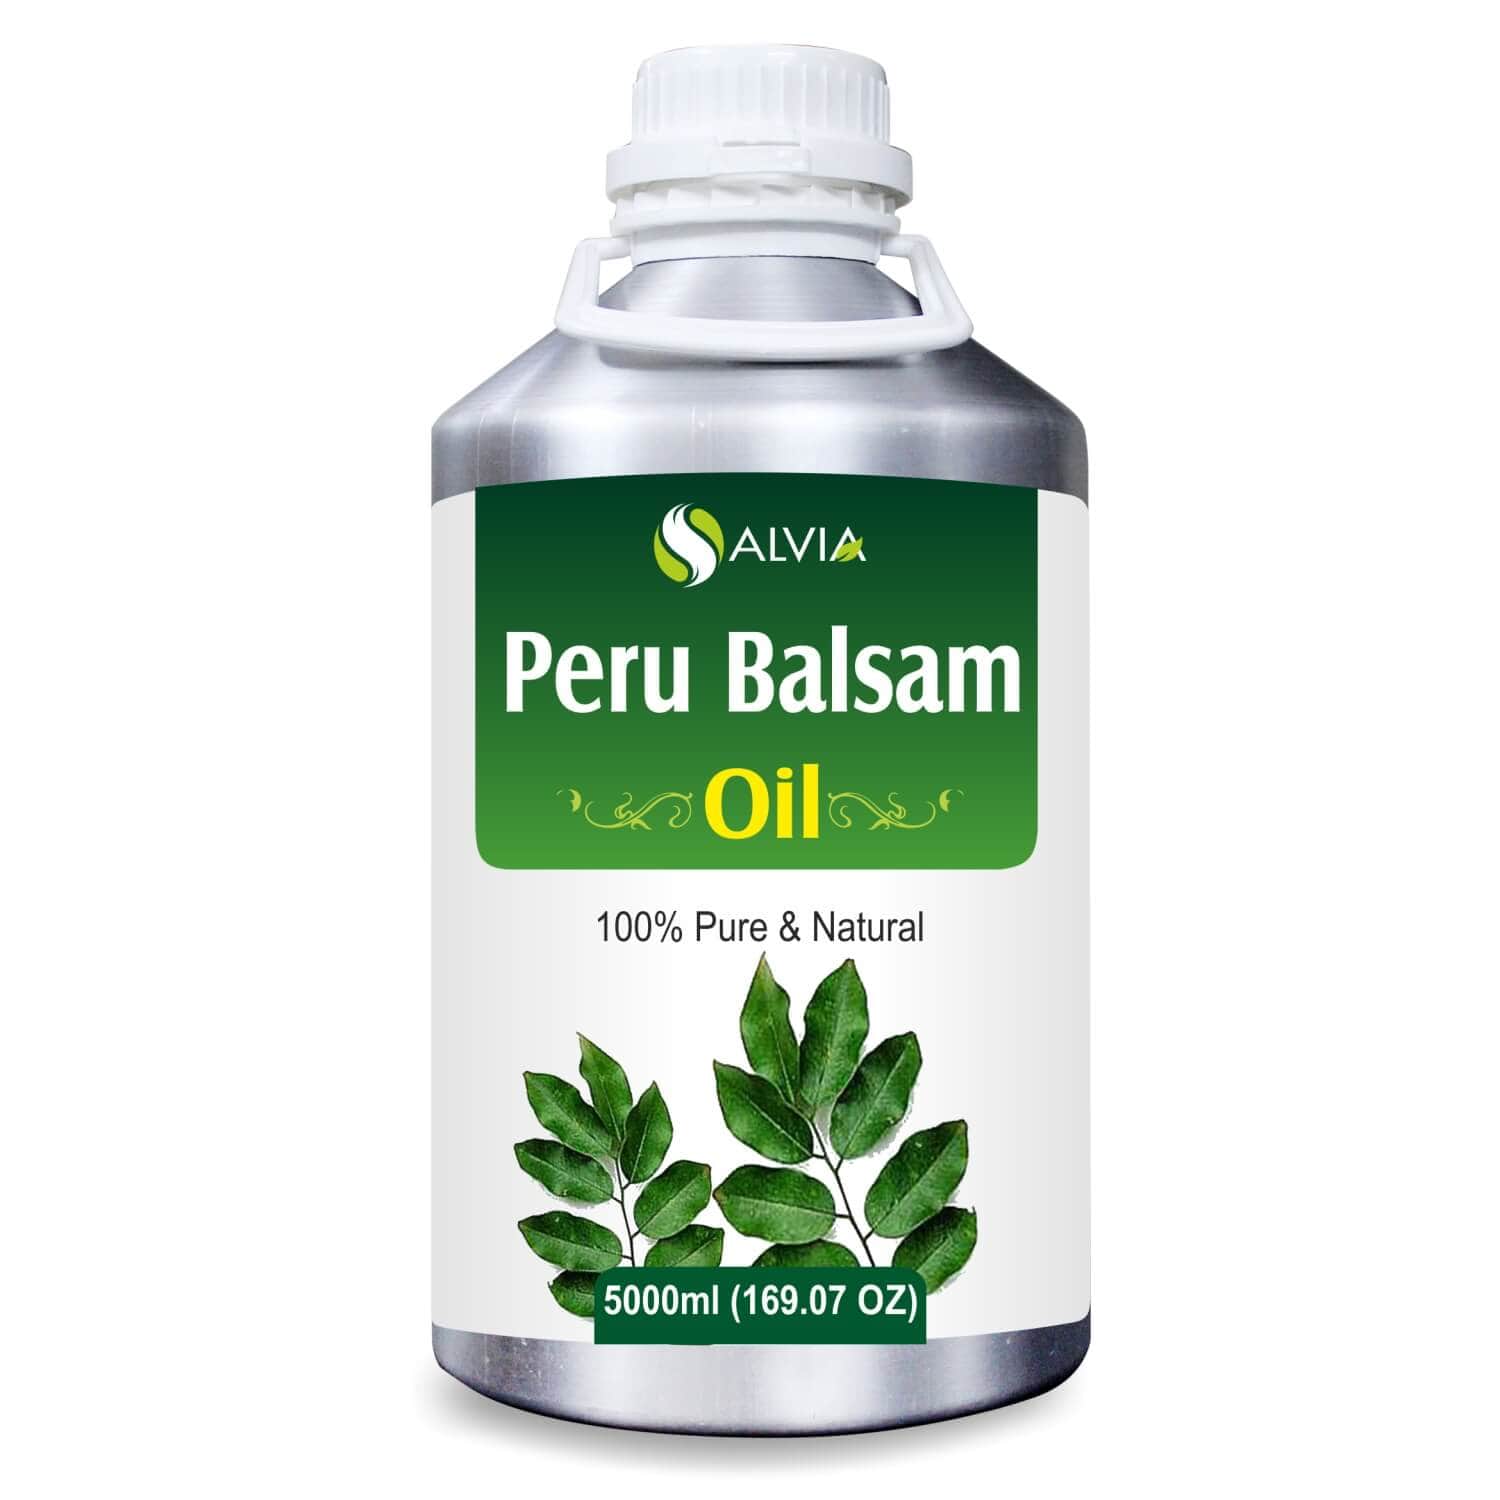 Salvia Natural Essential Oils 5000ml Peru Balsam Oil (Myroxylon-Pereirae) Natural Essential Oil Therapeutic Grade Excellent For Aromatherapy, Skin & Hair Care & Many More!